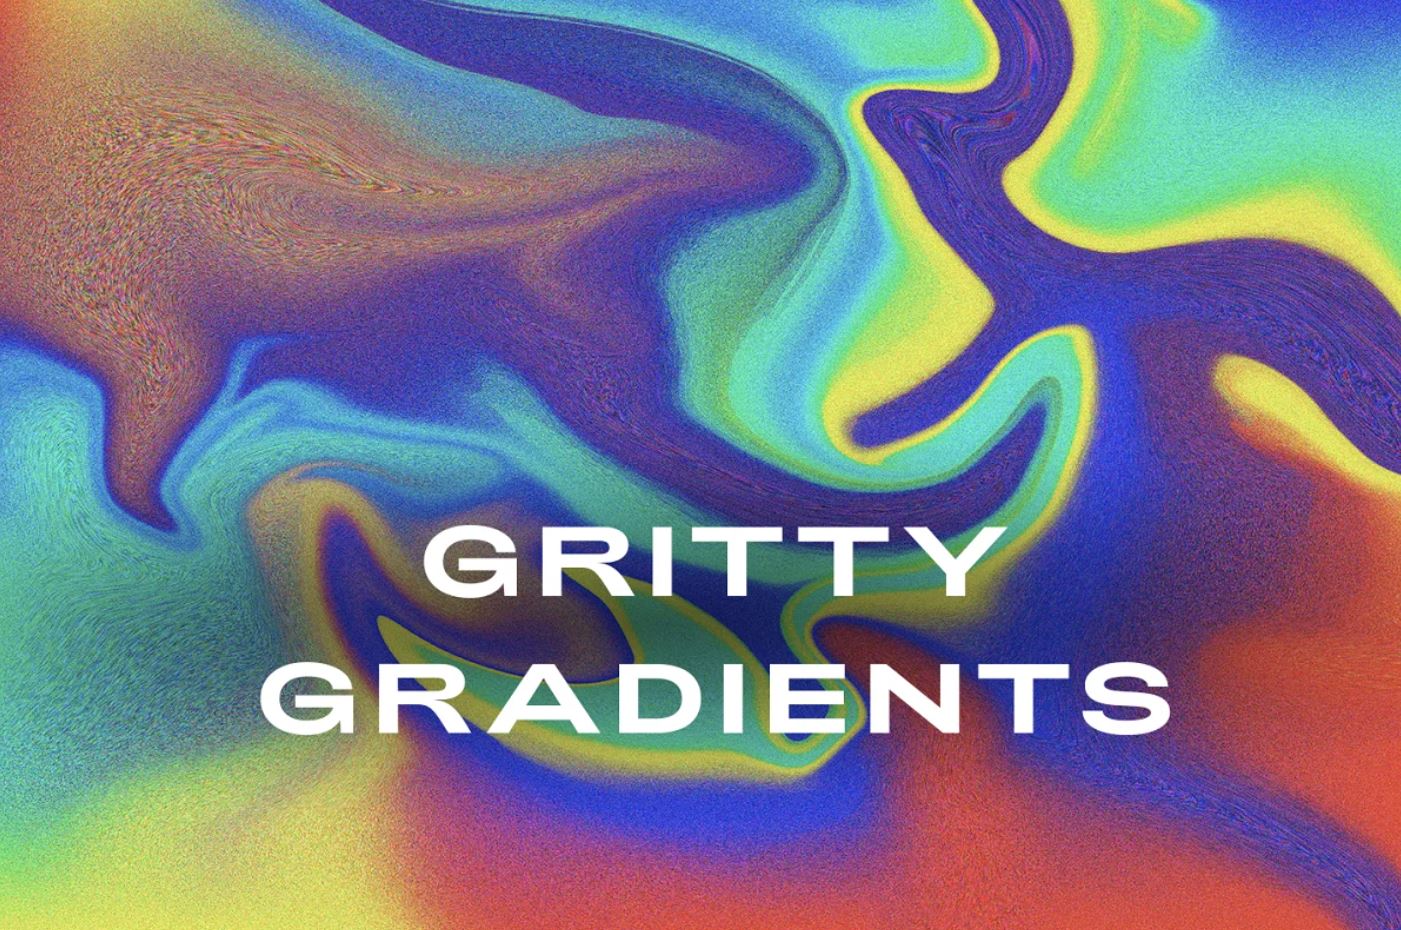 Vintage and gritty gradient backgrounds and elements